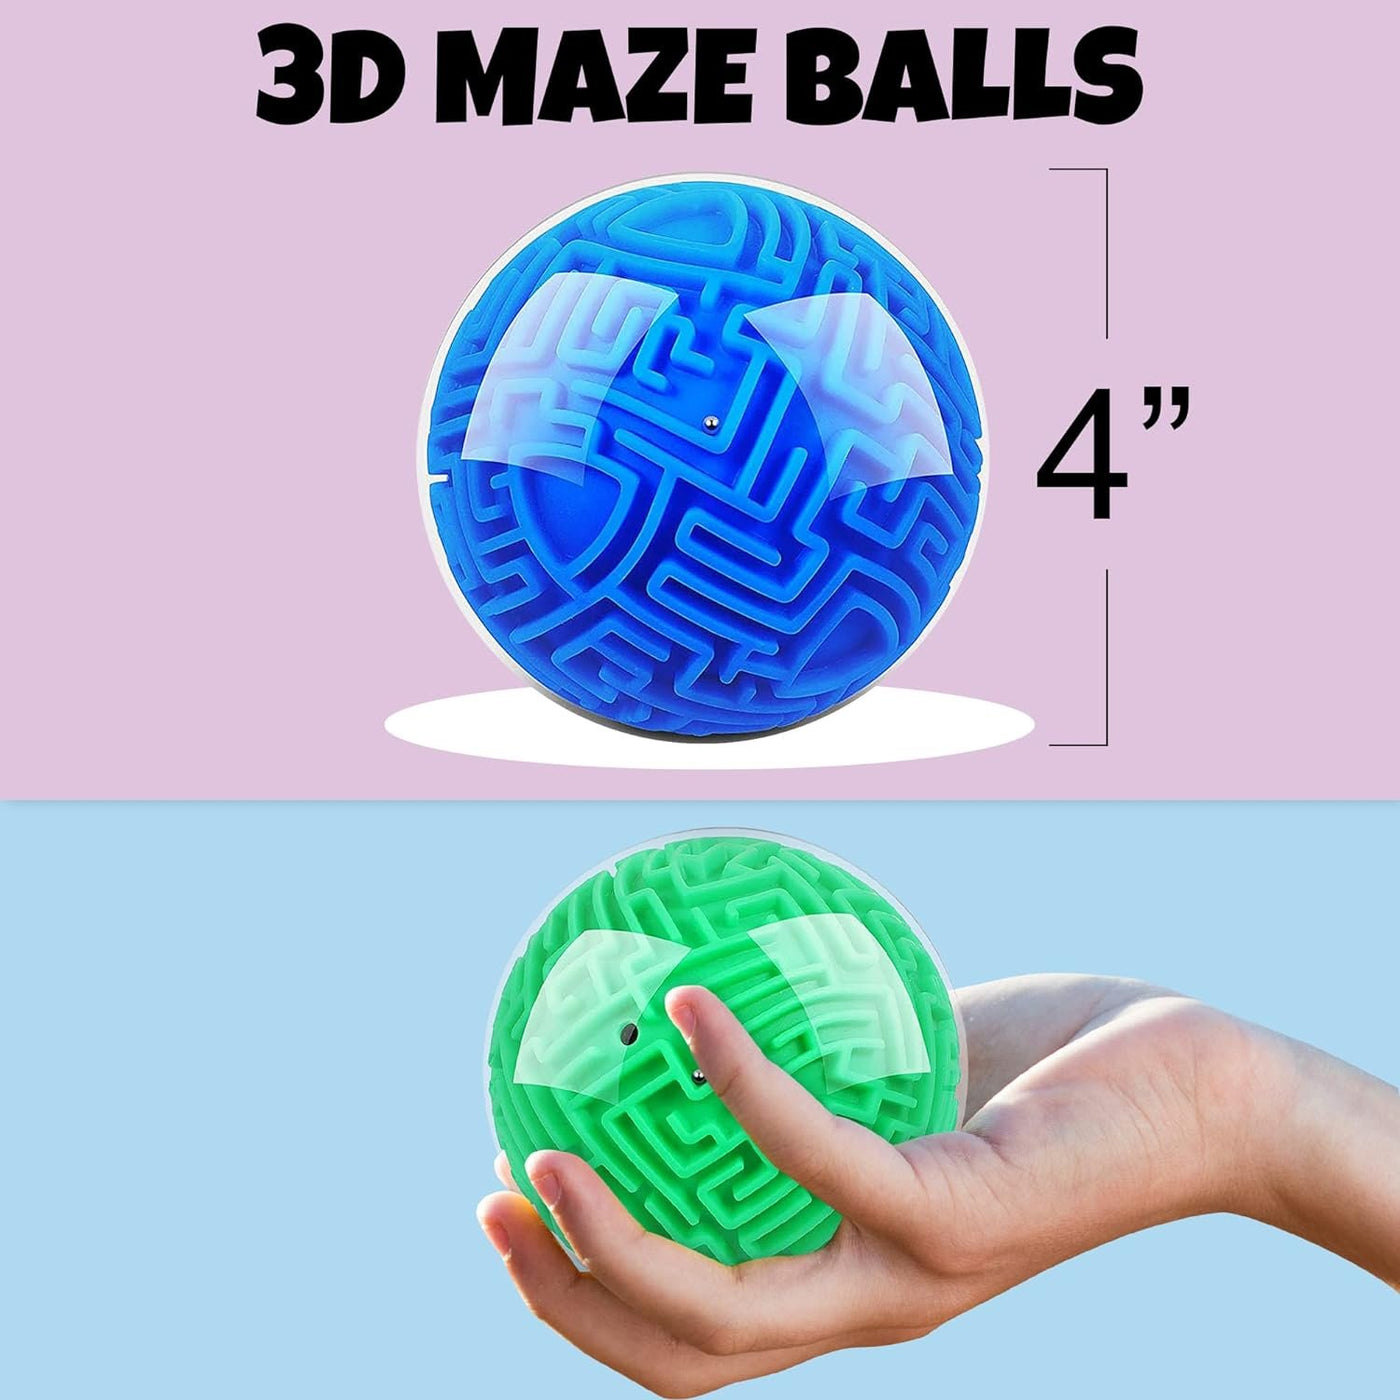 3D Maze Ball Puzzle Games for Kids, Set of 4, Includes 4 Brain Teaser Puzzles